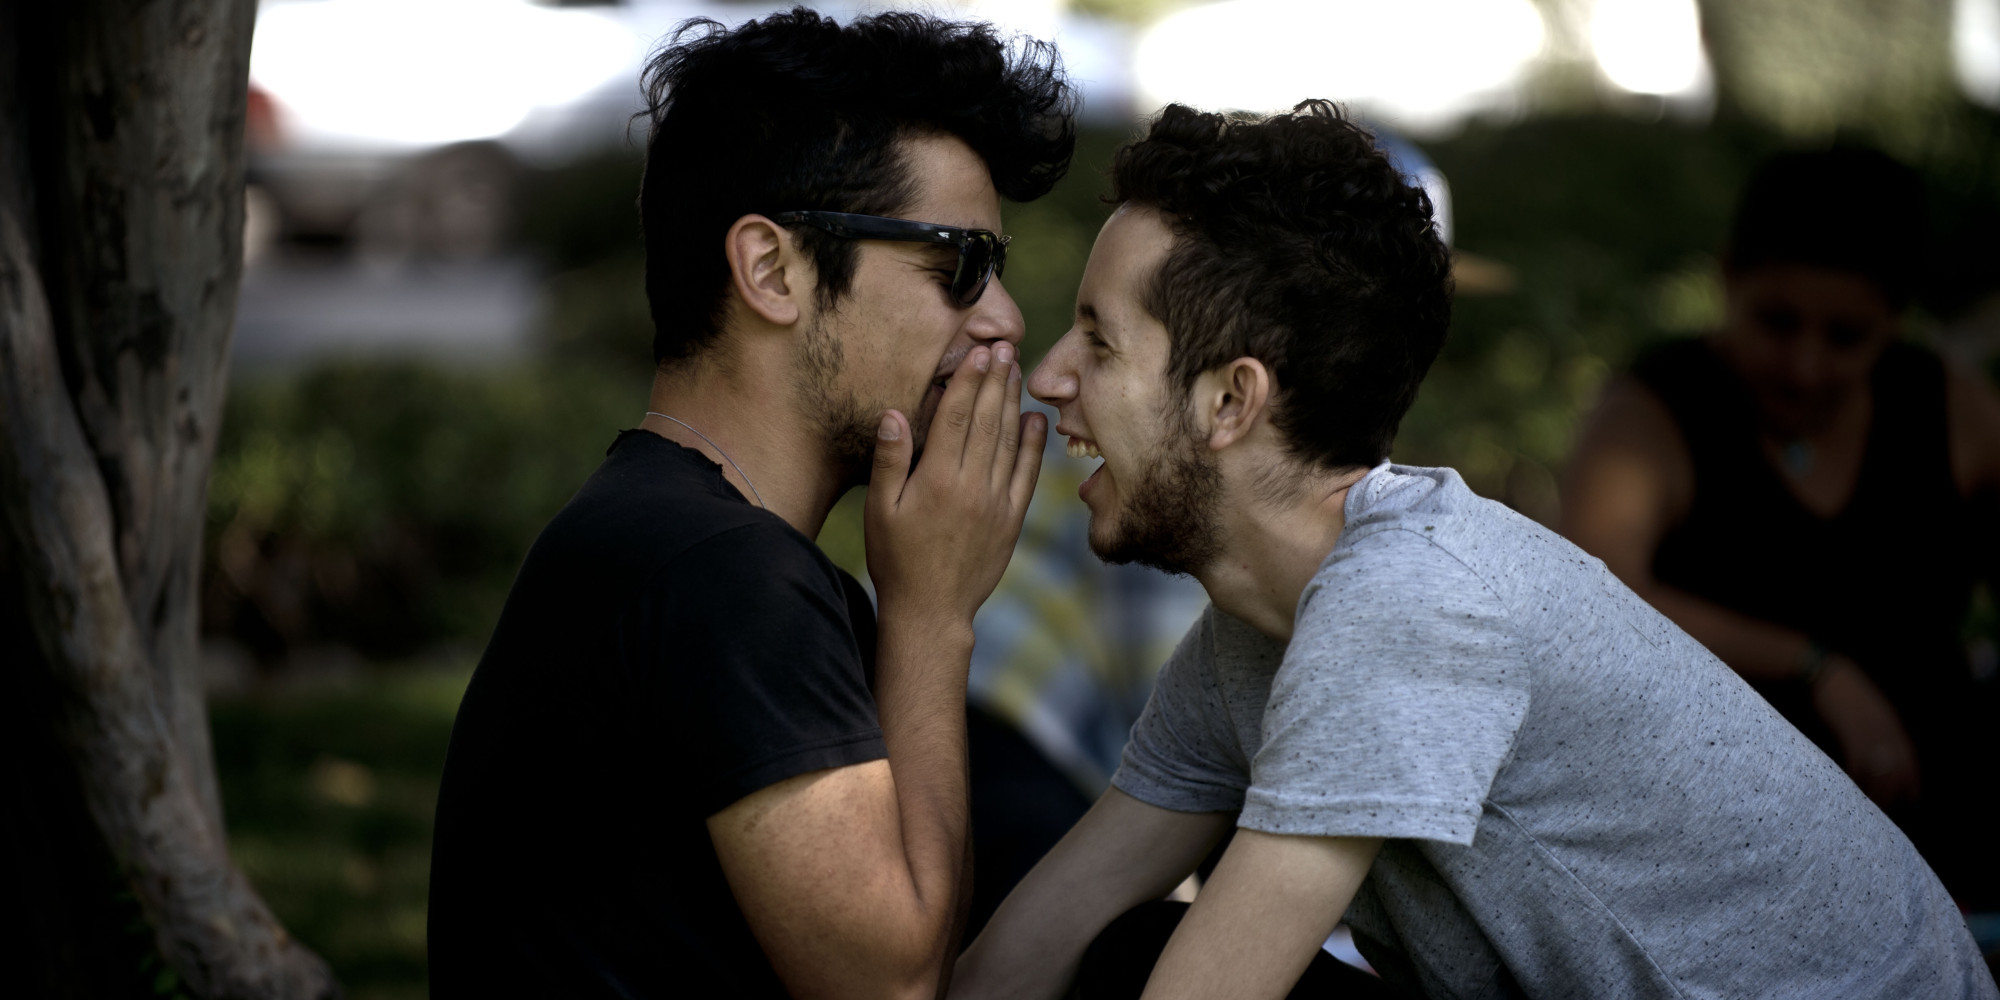 Chile's Same-Sex Civil Unions Bill Gets Final Approval By Lawmakers